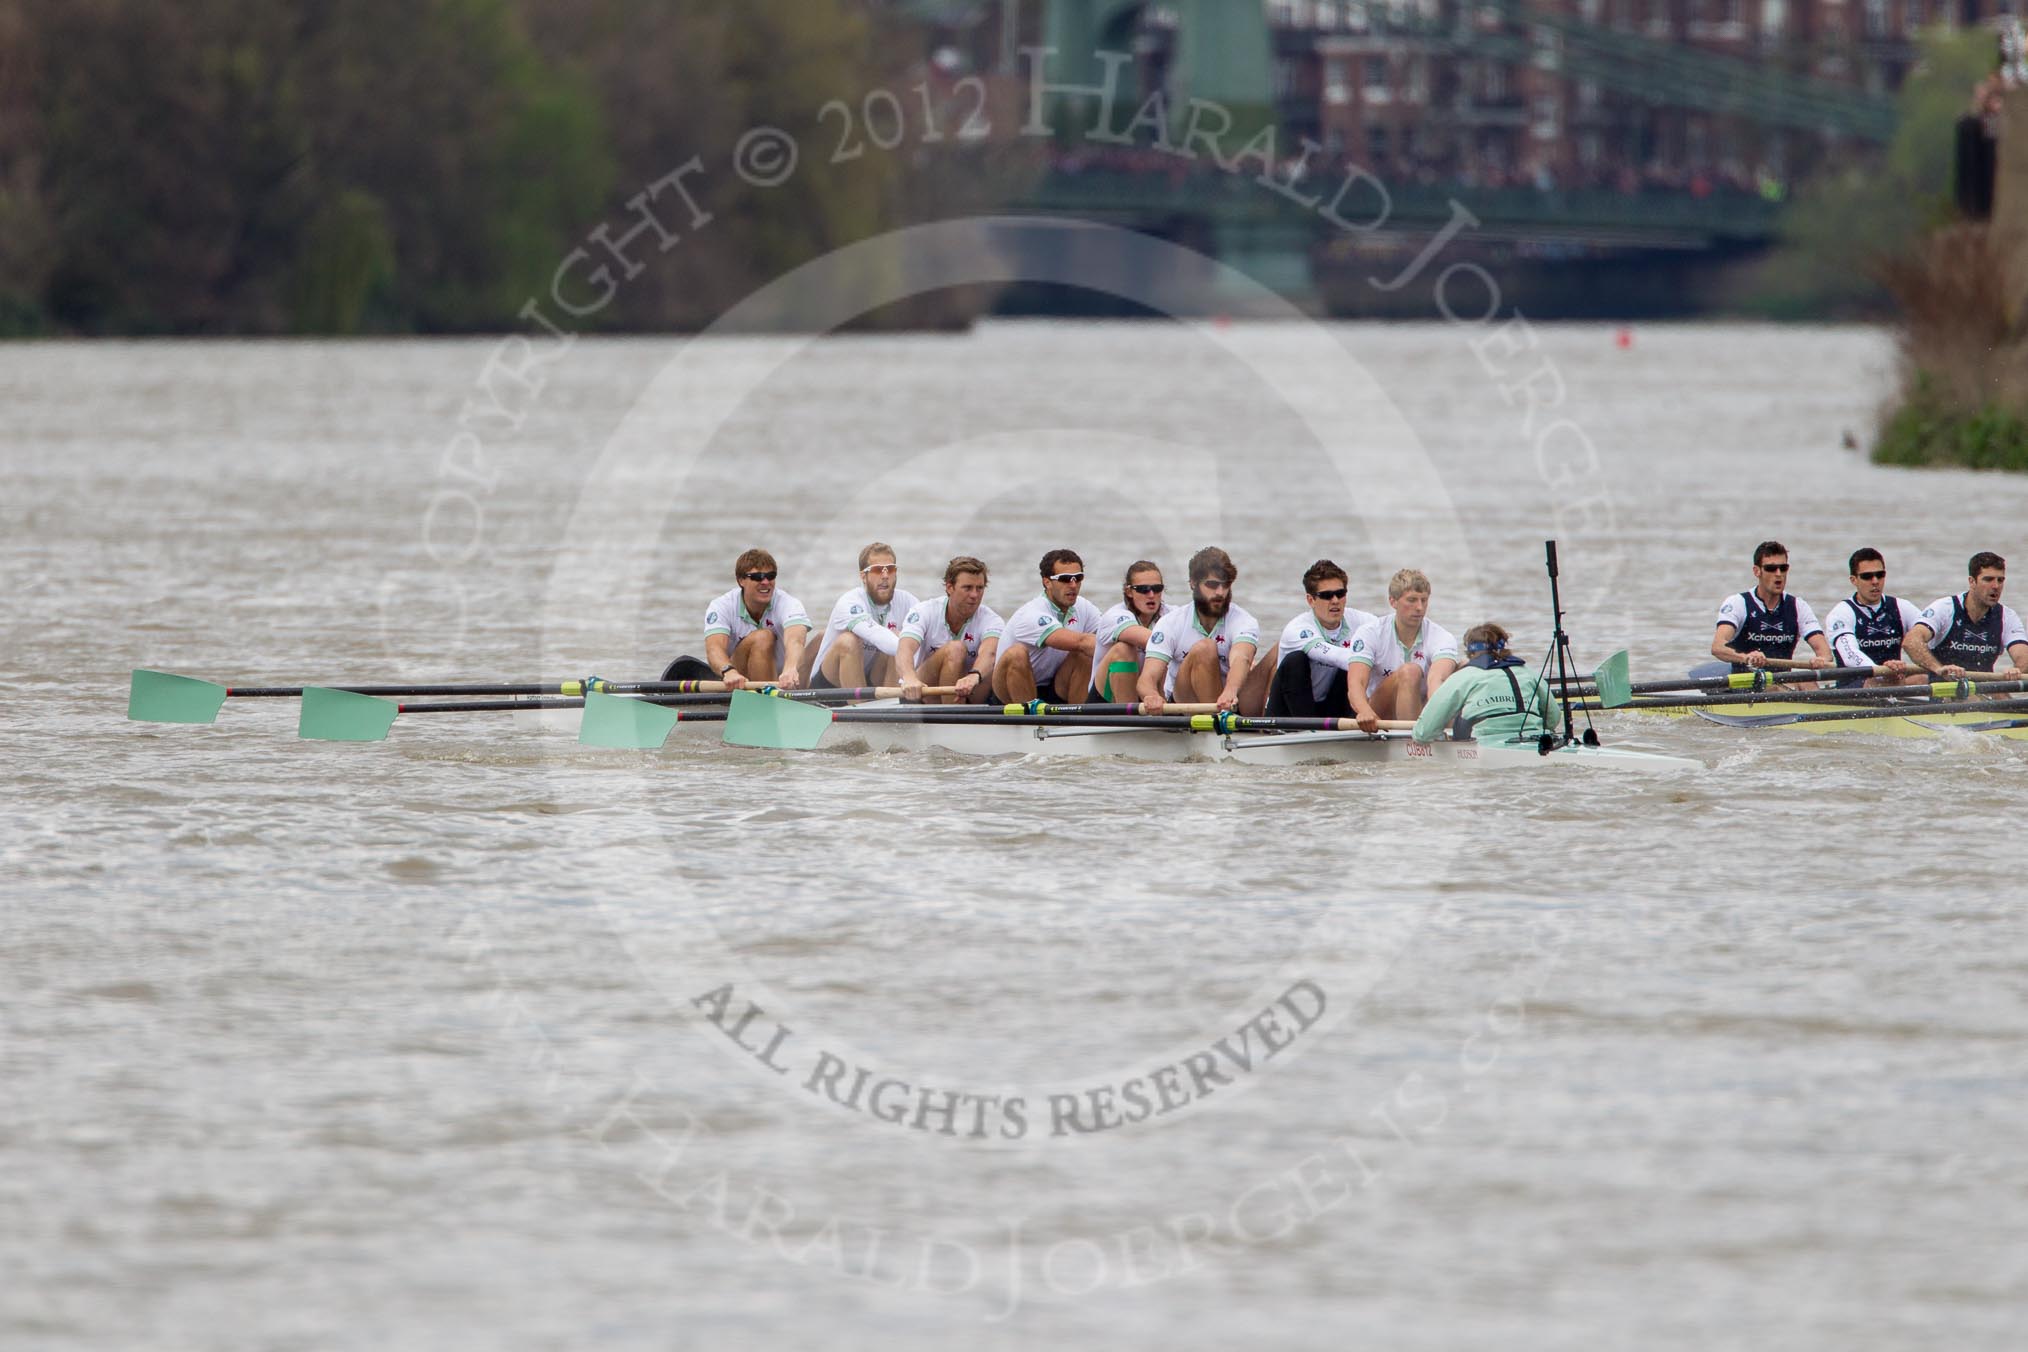 The Boat Race 2012: The 2012 Boat Race, shortly after the start: In the foreground the Cambridge Blue Boat, with David Nelson, Moritz Schramm, Jack Lindeman, Alex Ross, Mike Thorp, Steve Dudek, Alexander Scharp, Niles Garret, and cox Ed Bosson, in the Oxford boat Dr. Alexander Woods, William Zeng, Kevin Baum, Alex Davidson, Karl Hudspith, Dr. Hanno Wienhausen, Dan Harvey, stroke Roel Haen, and cox Zoe de Toledo..




on 07 April 2012 at 14:17, image #270